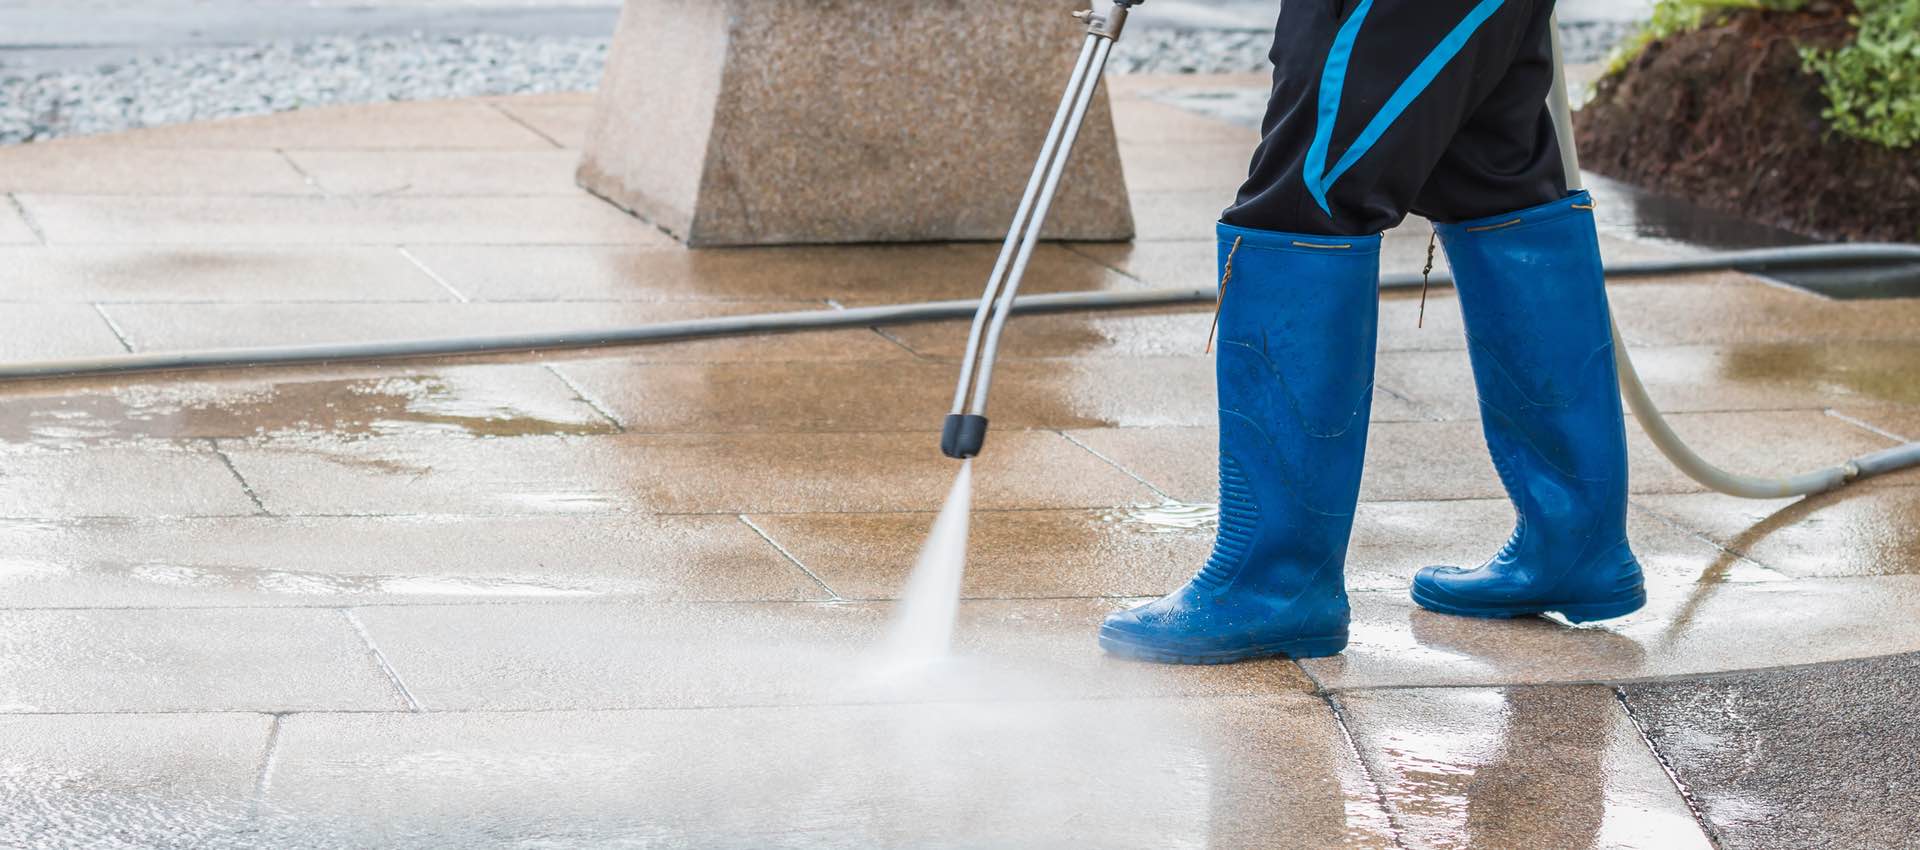 Six Questions to Consider Before Hiring Pressure Washing Services in Crowley TX